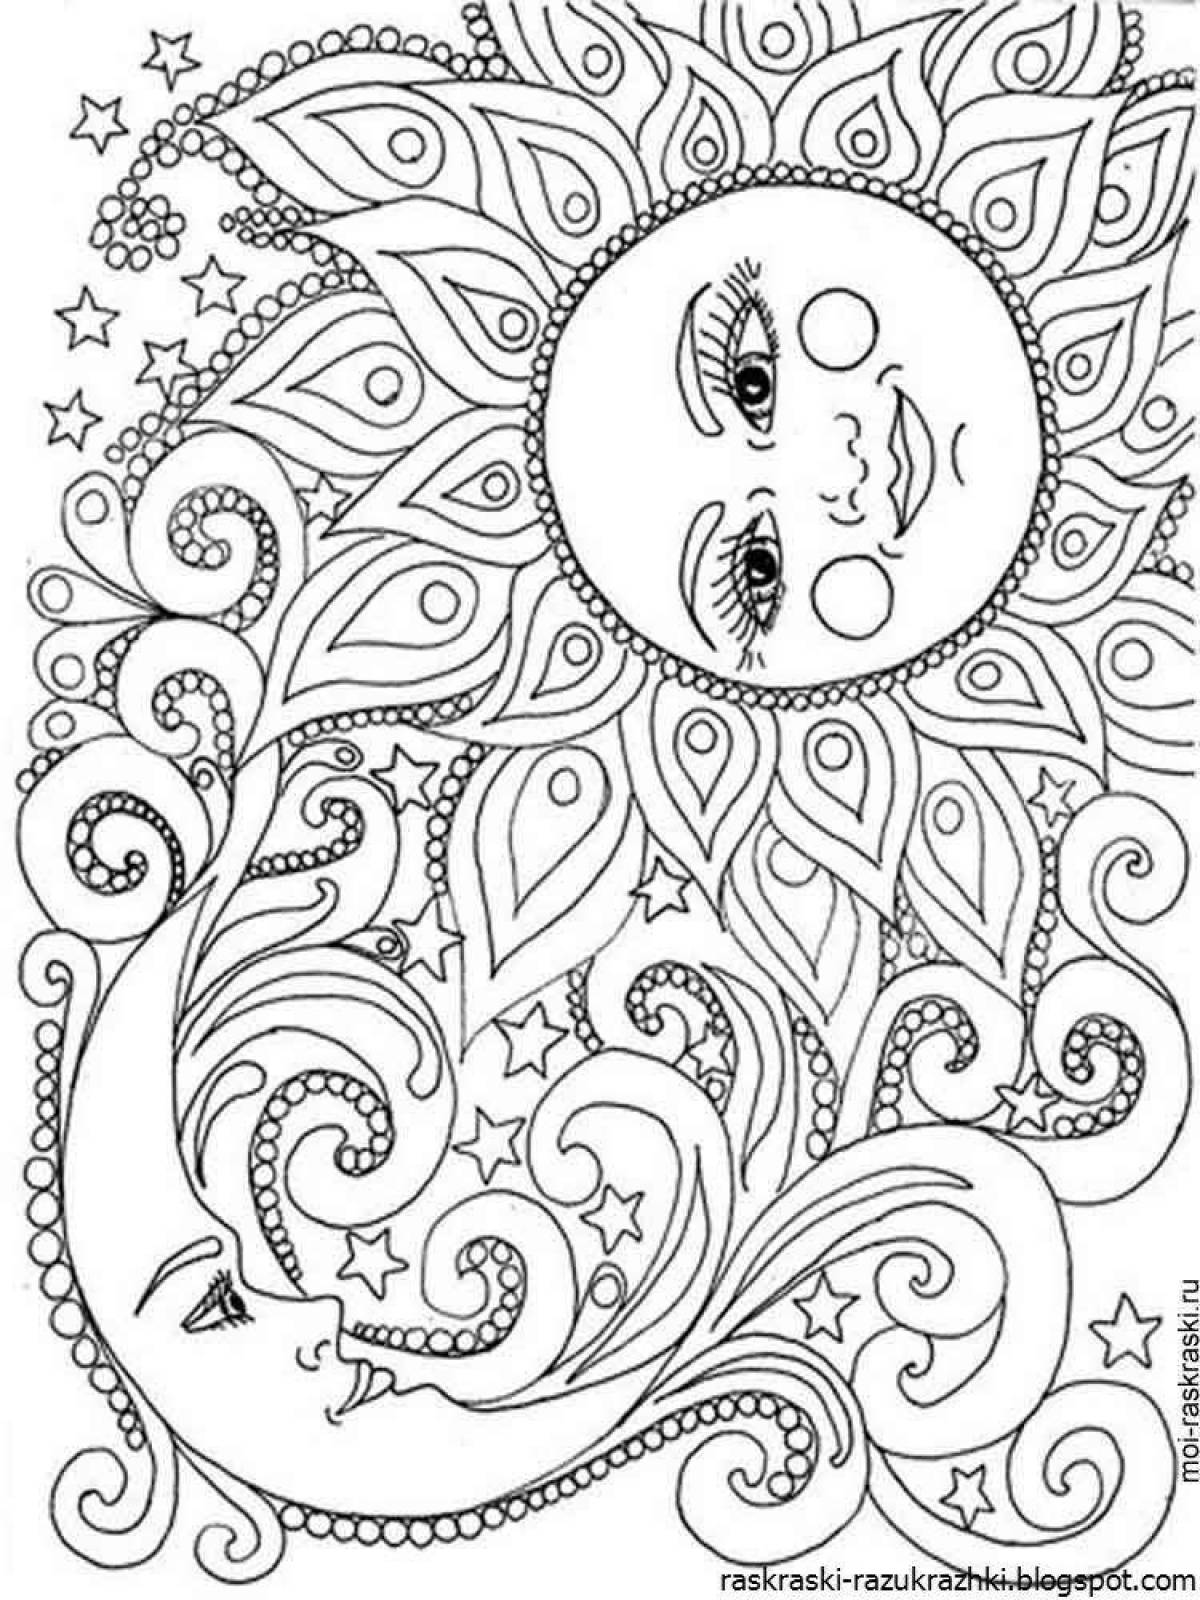 Gracious coloring pages nerves